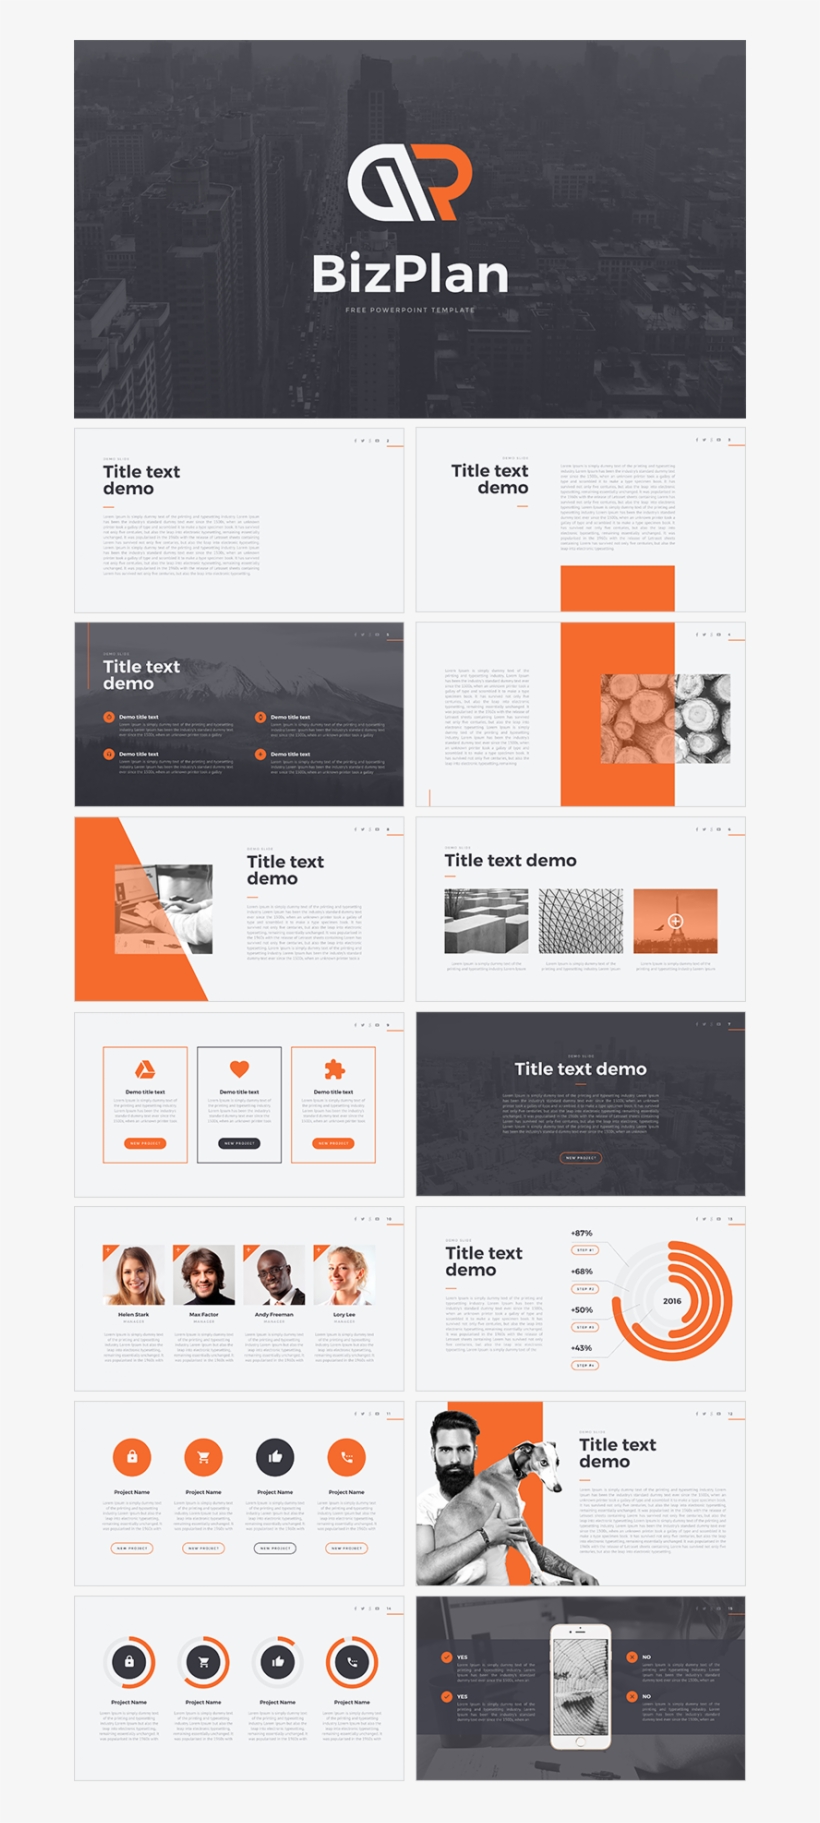 Large Size Of Bizplan Free Powerpoint Template Download - Microsoft Powerpoint, transparent png #6154637